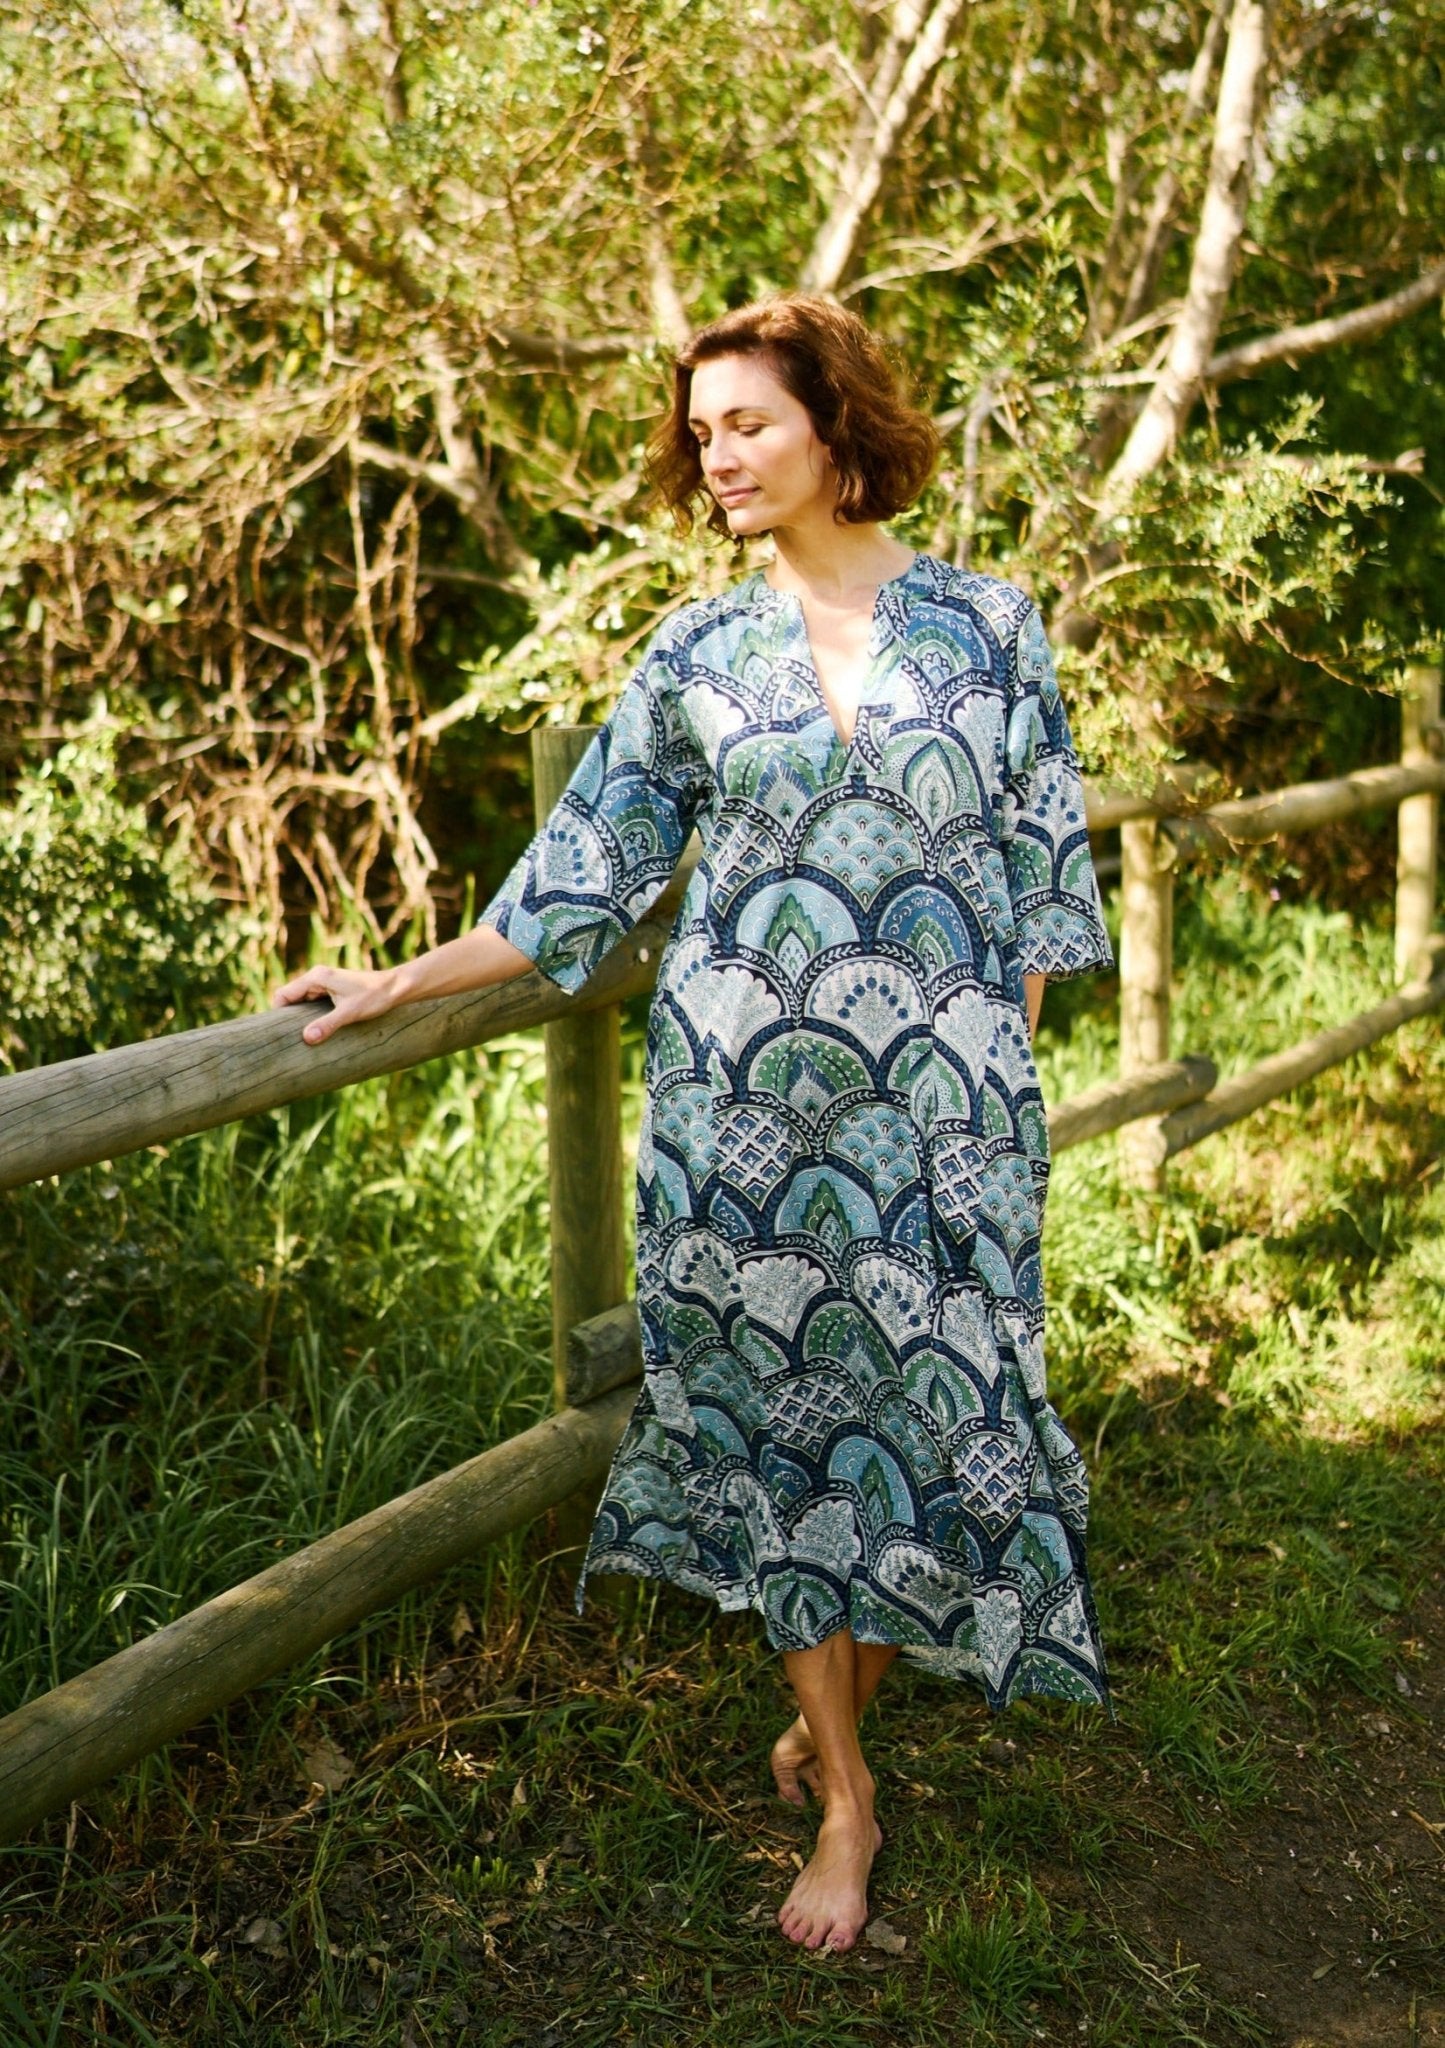 Tunic Dress In Blue And Green Bold Print - Tribute StoreICONIC